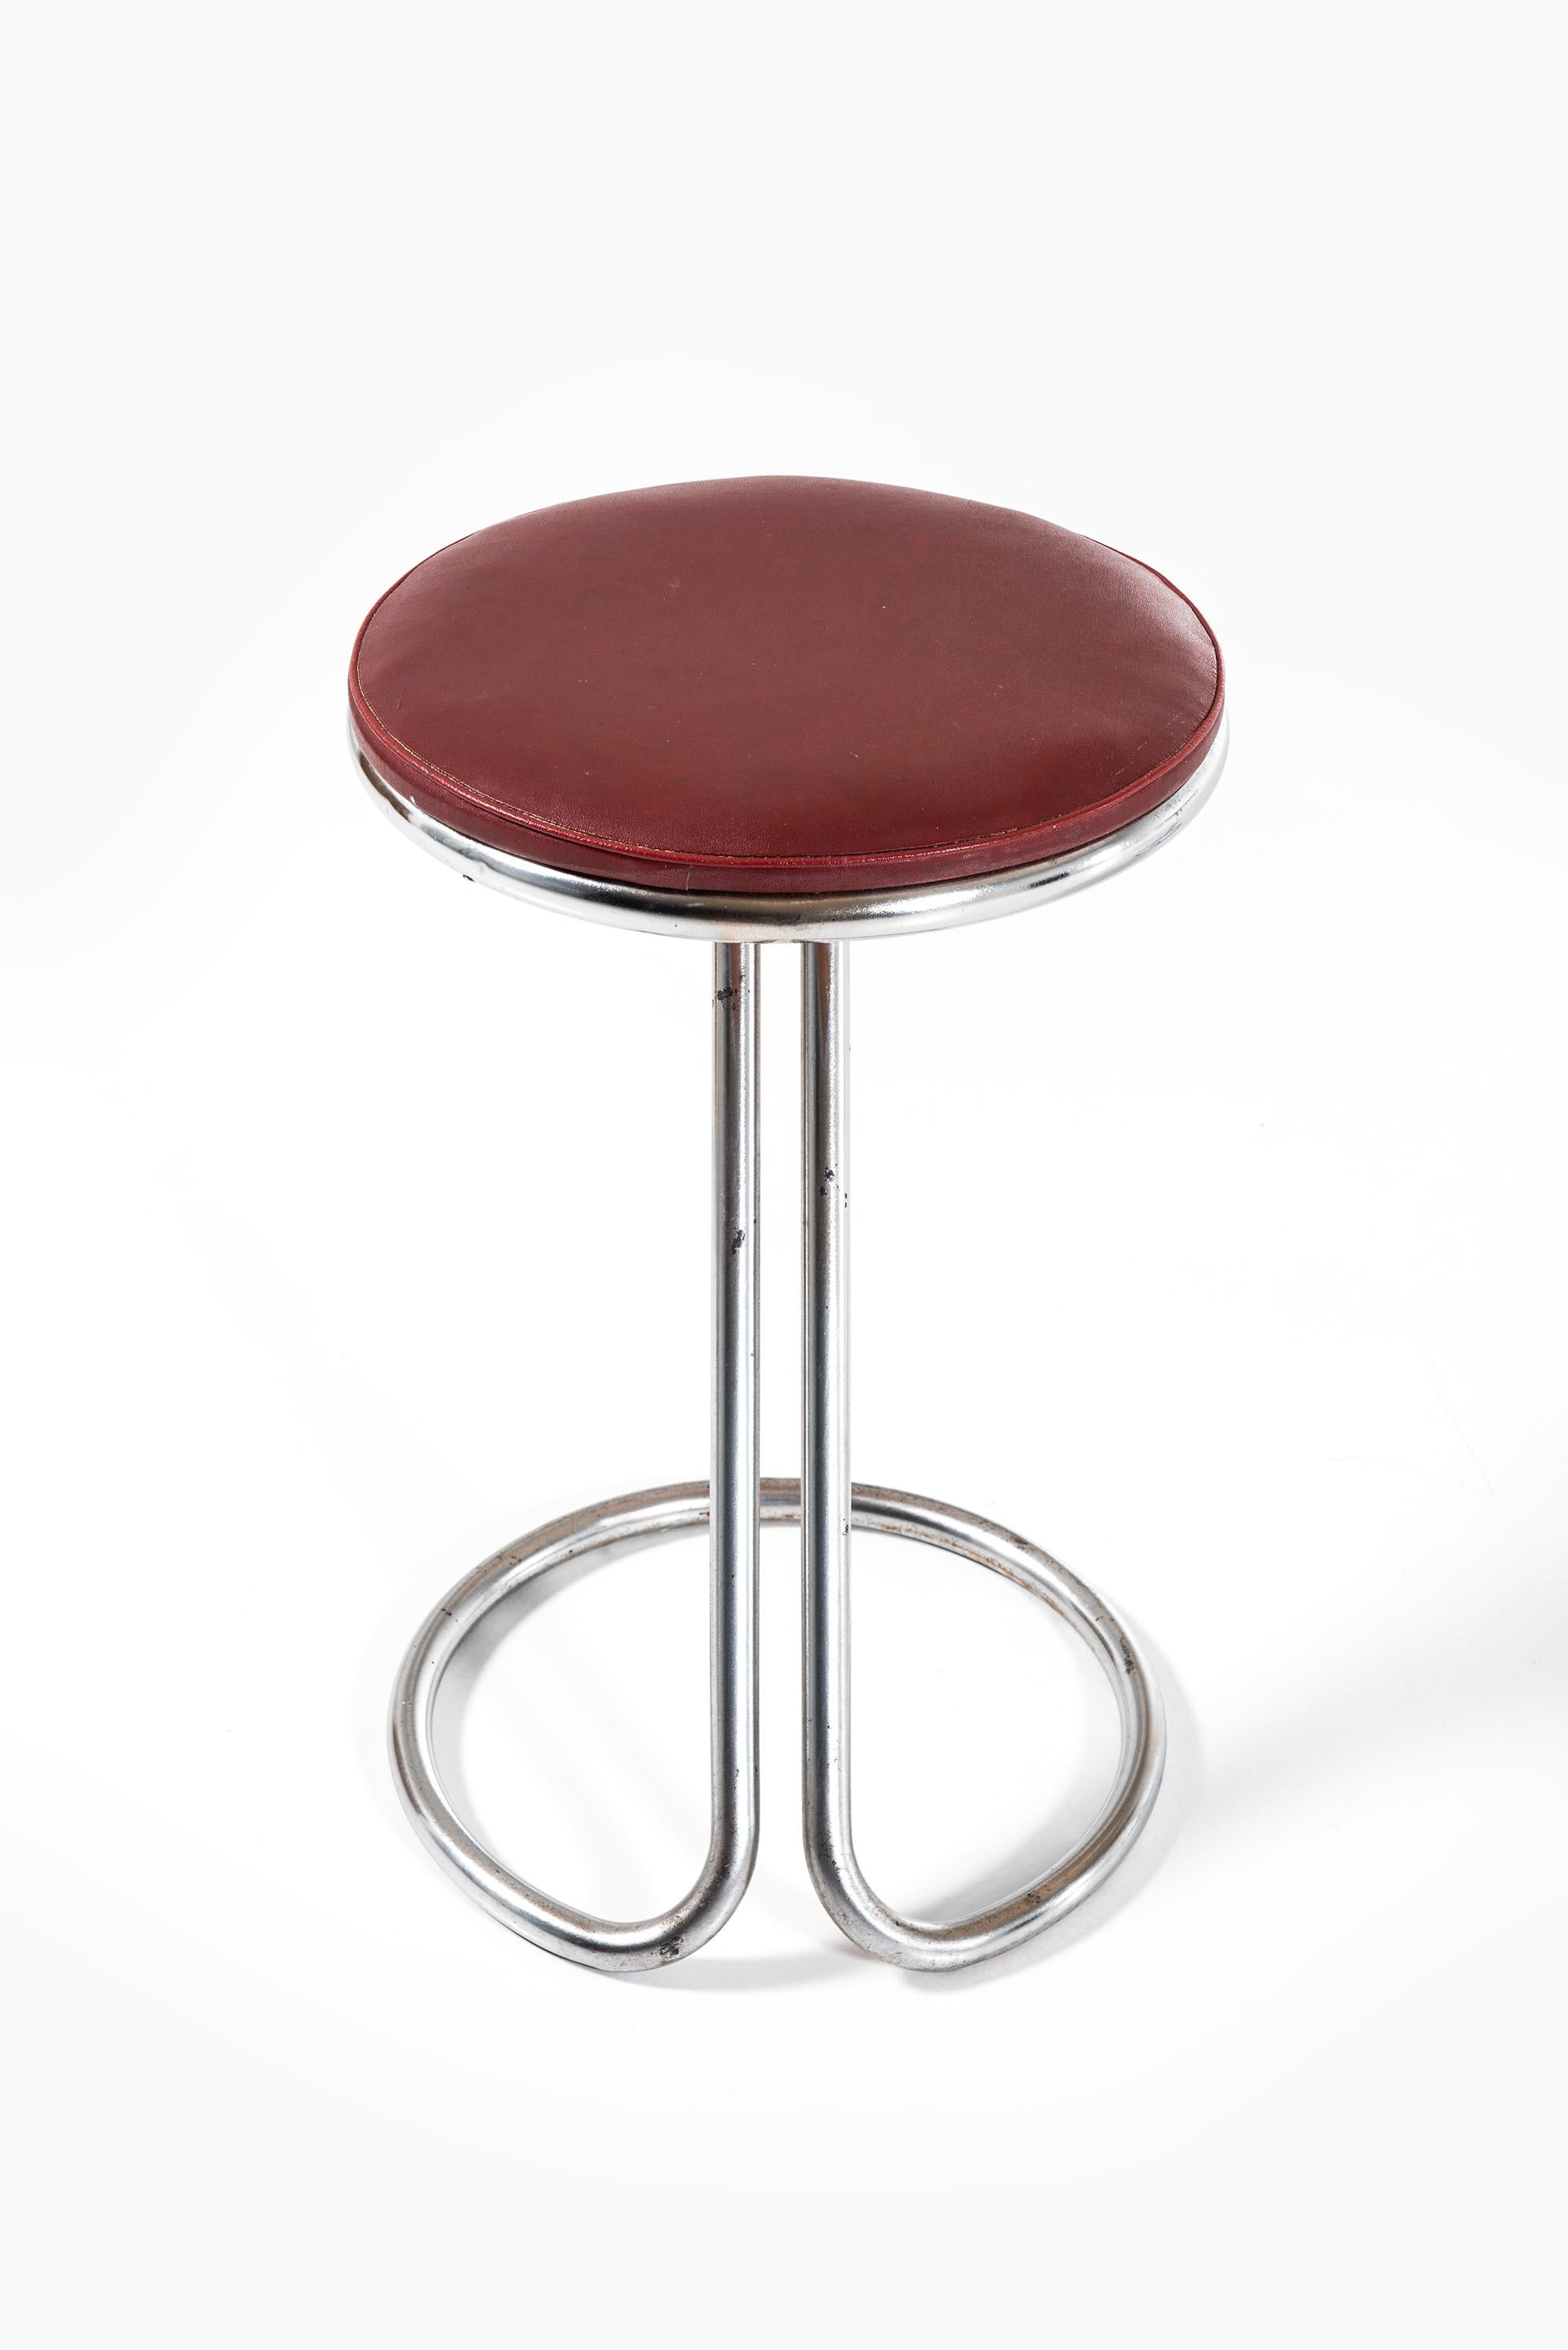 Danish Pair of Stools in the Manner of Poul Henningsen Produced in Denmark